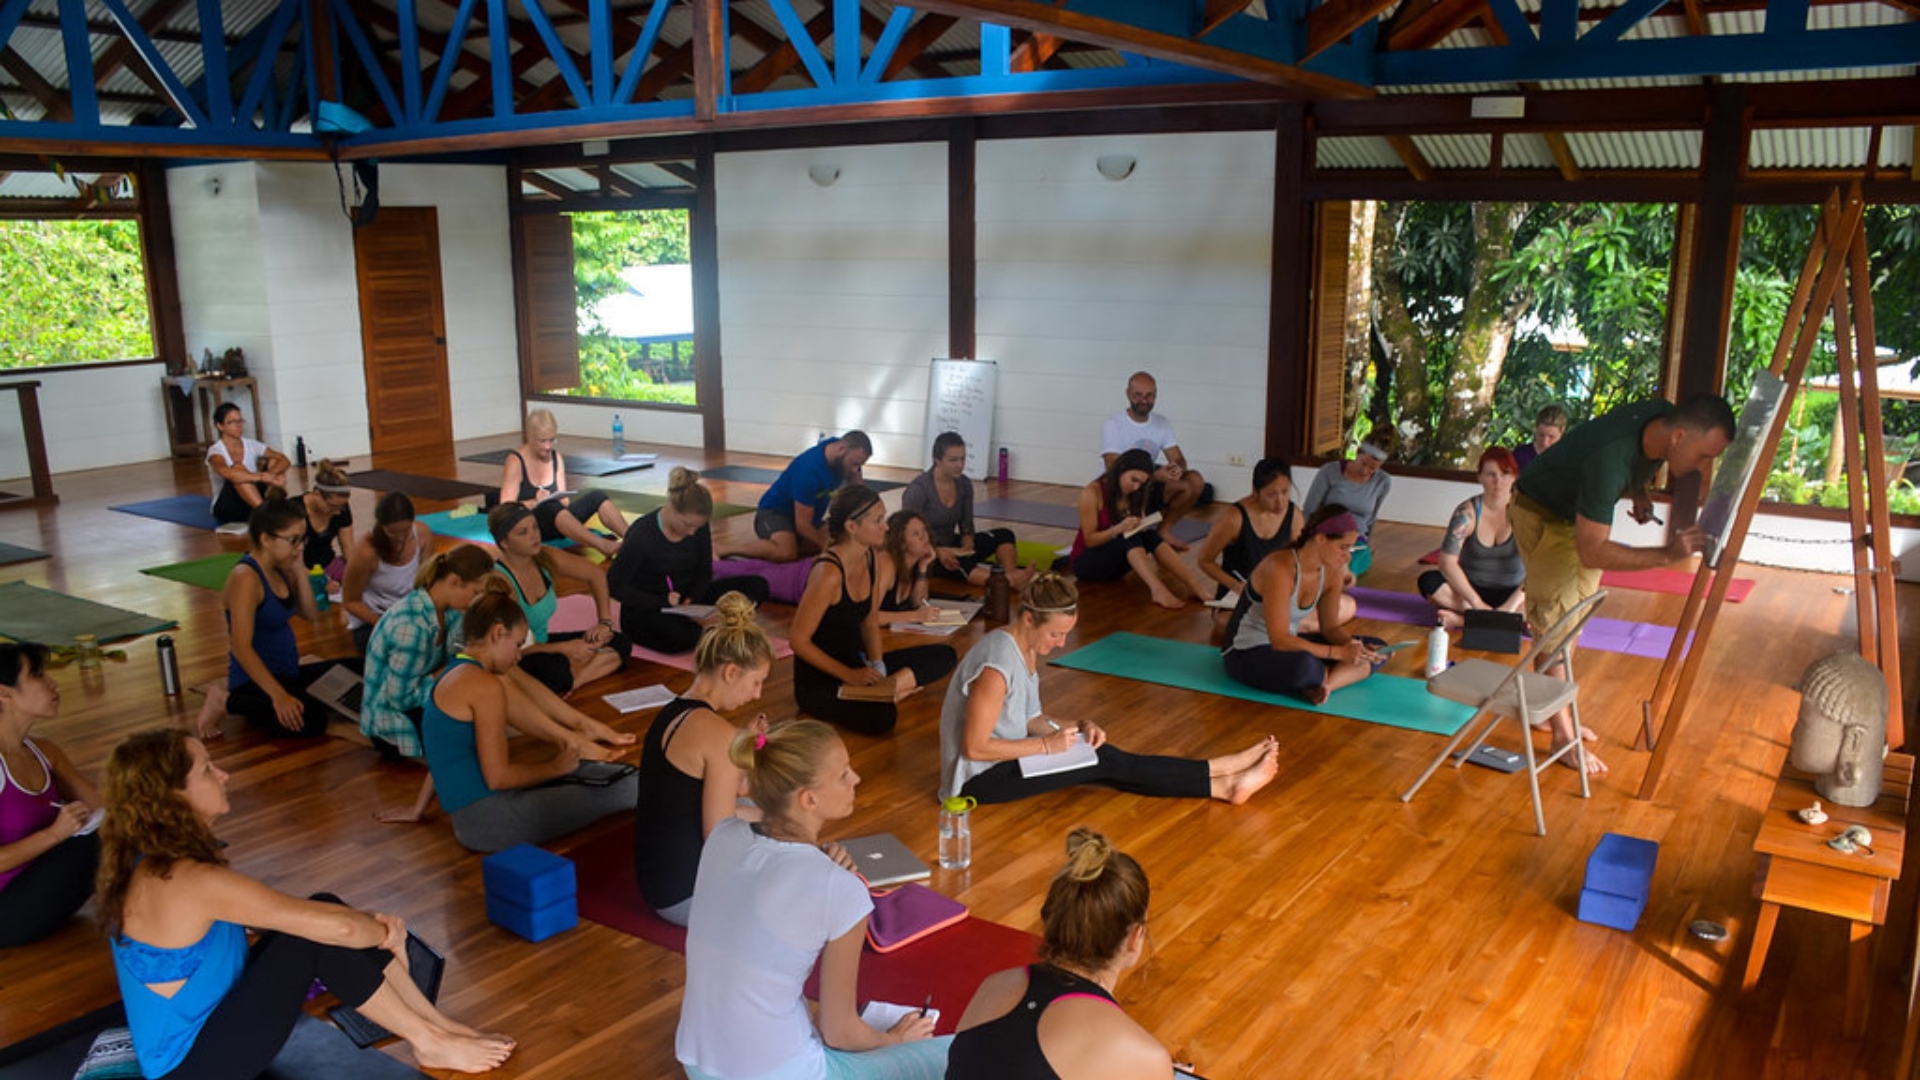 Yoga students sitting on their mats during a YTT in Blue Osa's yoga shala in Costa Rica.